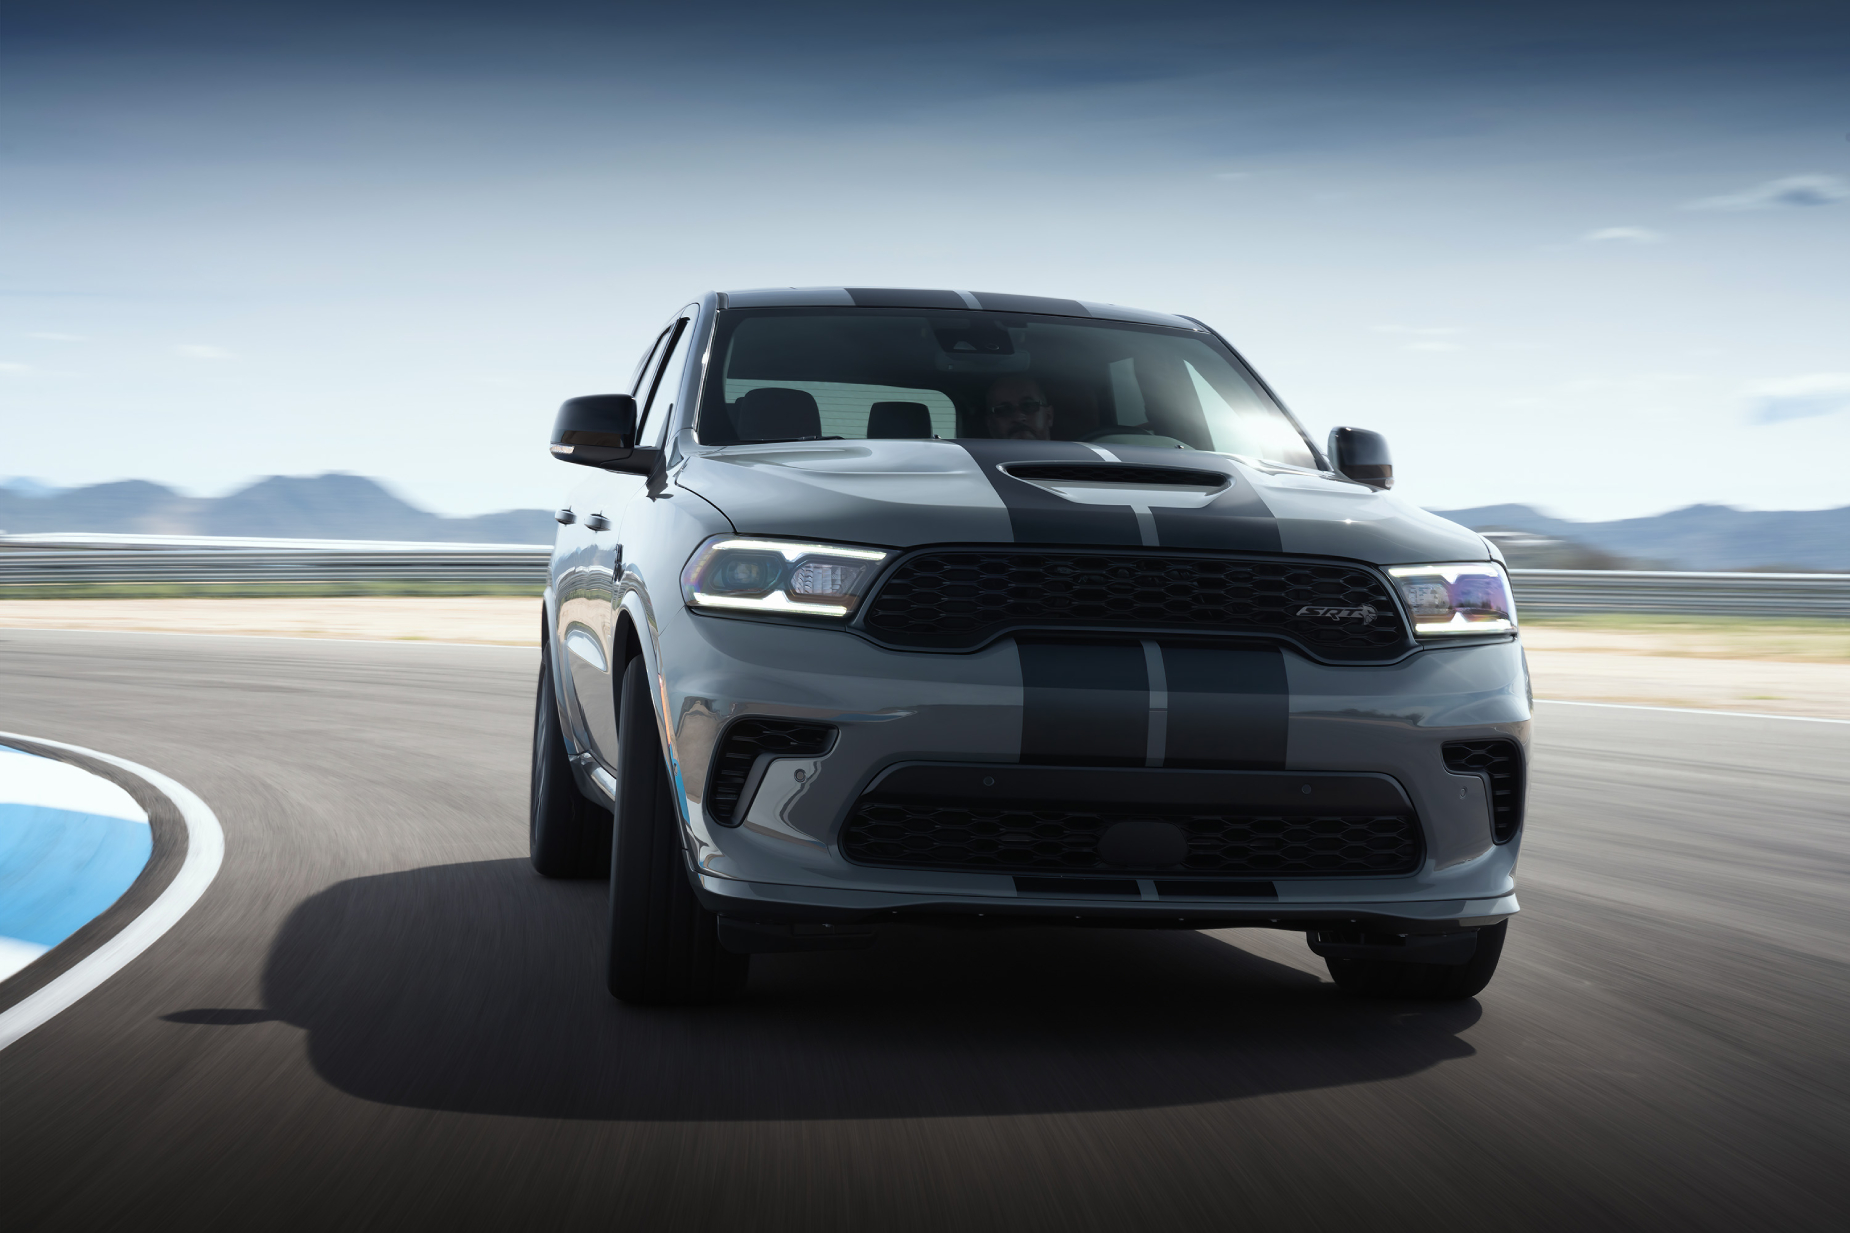 A silver and black 2021 Dodge Durango Hellcat driving on a track